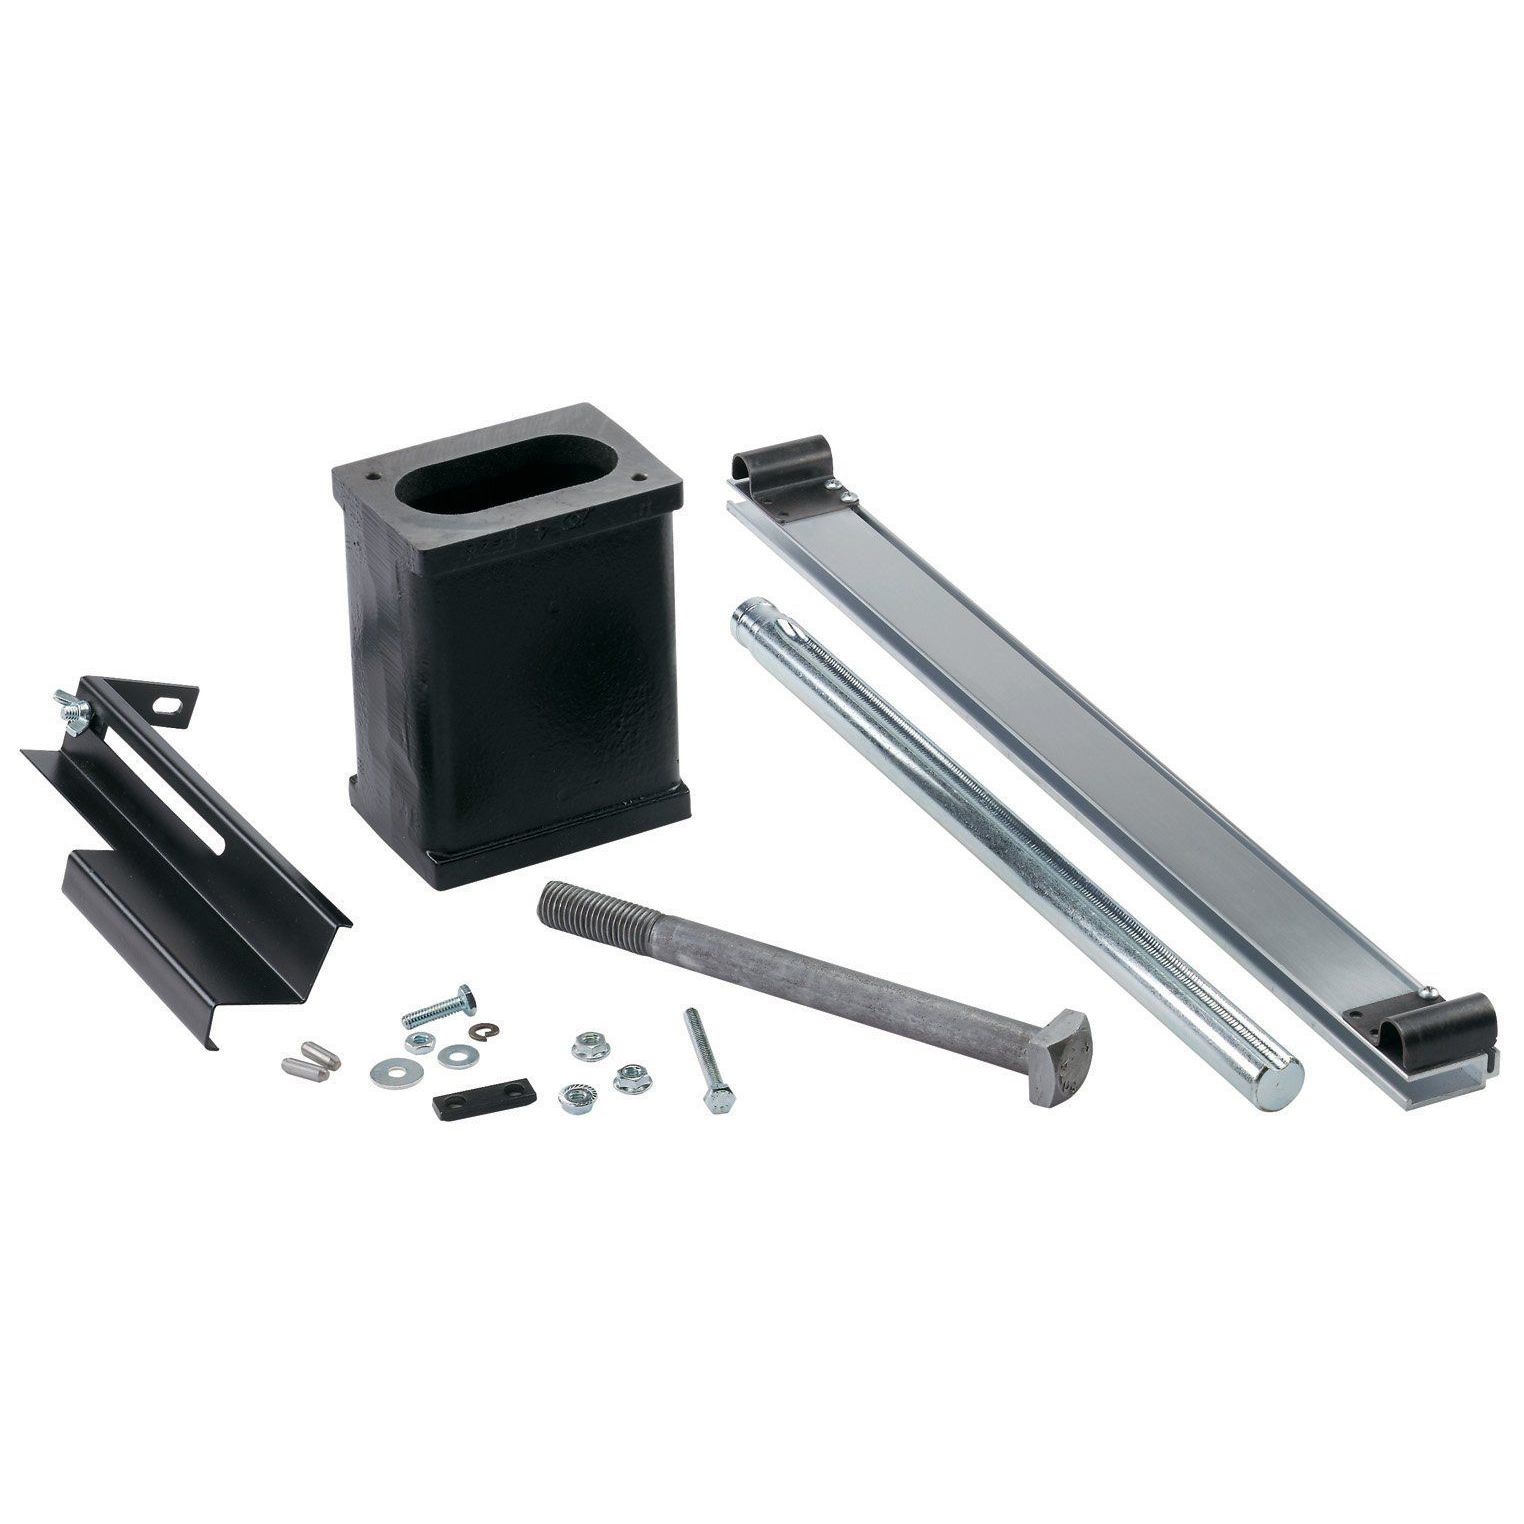 Band Saw Accessories